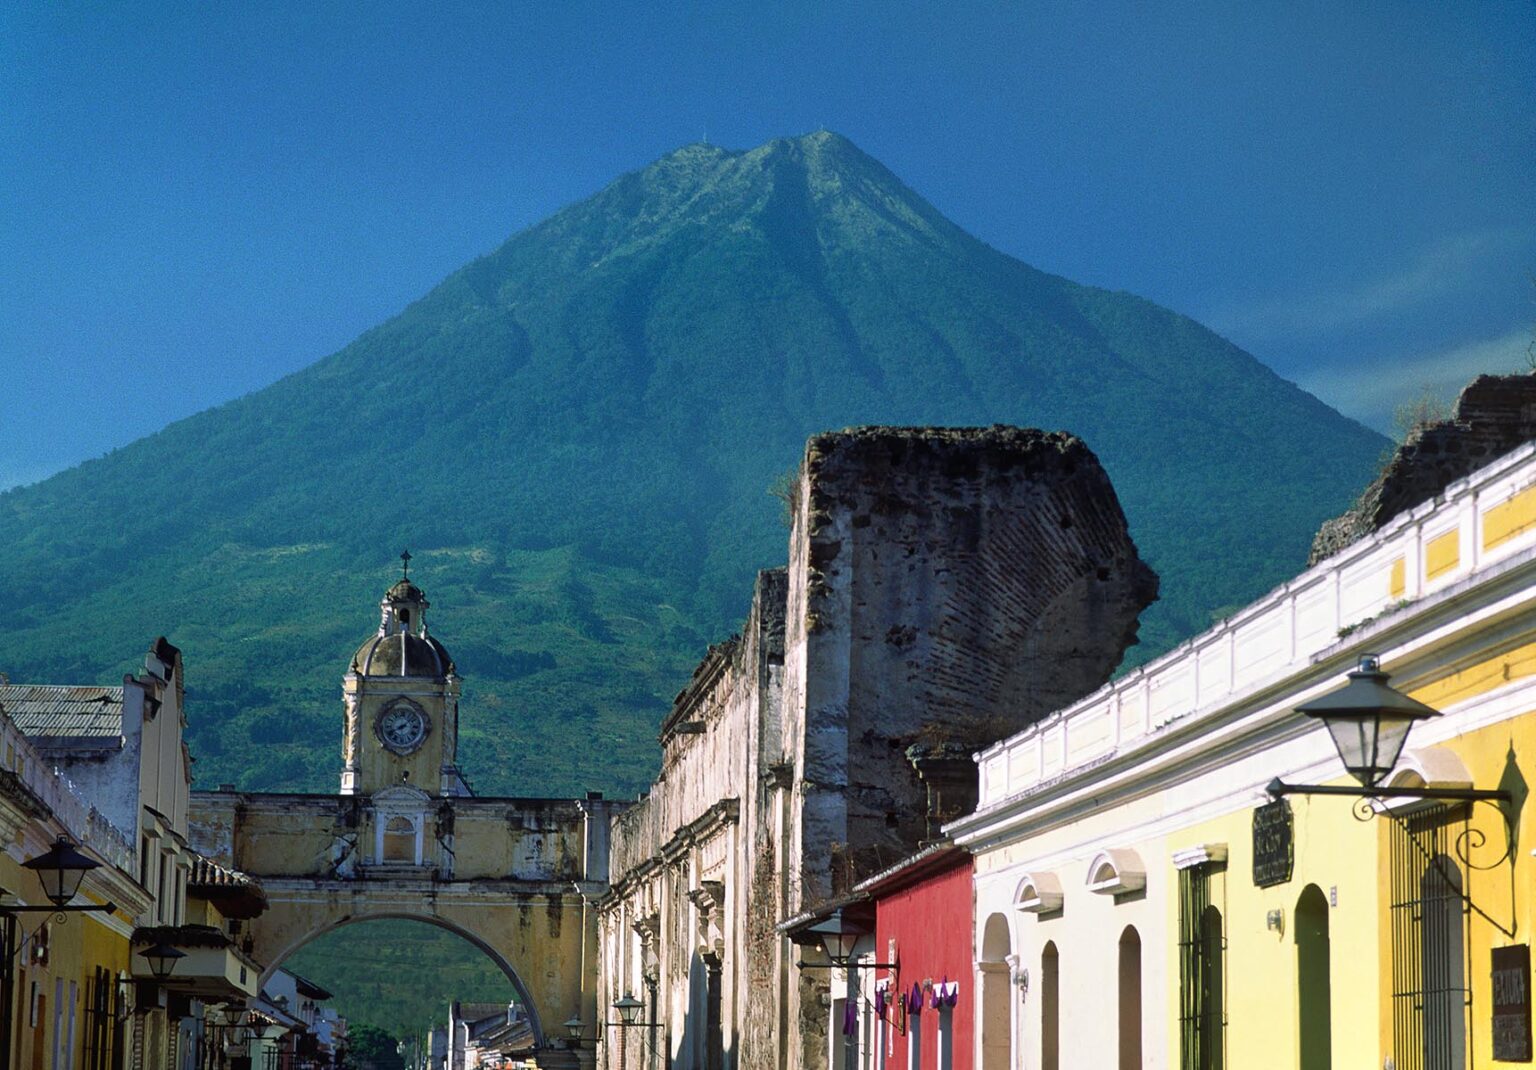 RUINS of RECOLLECTION CONVENT, left in rubble on the ground by EARTHQUAKES - ANTIGUA, GUATEMALA